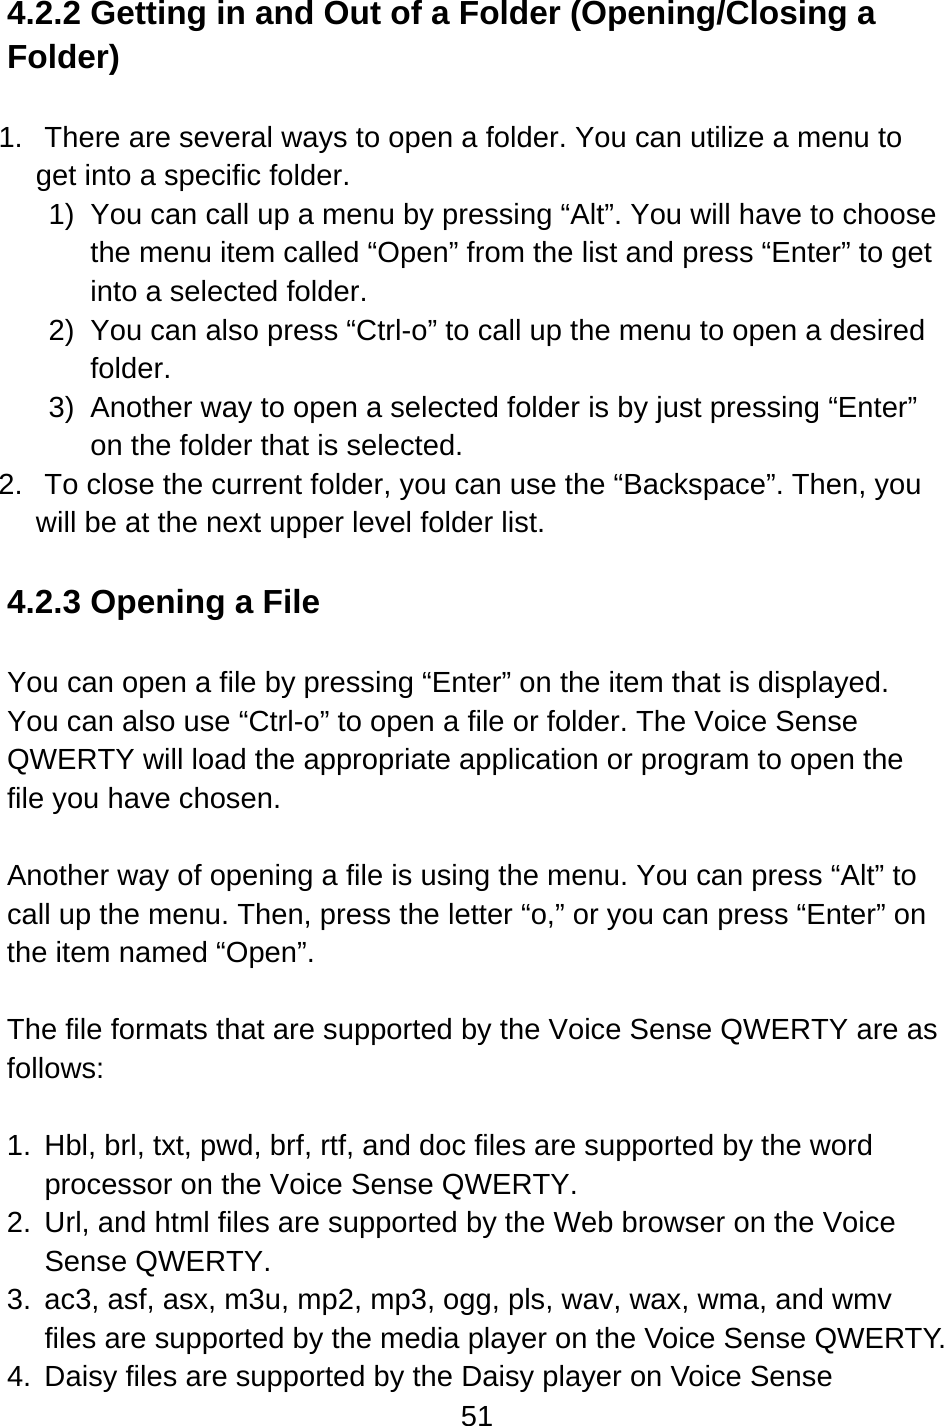 51  4.2.2 Getting in and Out of a Folder (Opening/Closing a Folder)  1.  There are several ways to open a folder. You can utilize a menu to get into a specific folder. 1)  You can call up a menu by pressing “Alt”. You will have to choose the menu item called “Open” from the list and press “Enter” to get into a selected folder. 2)  You can also press “Ctrl-o” to call up the menu to open a desired folder. 3)  Another way to open a selected folder is by just pressing “Enter” on the folder that is selected. 2.  To close the current folder, you can use the “Backspace”. Then, you will be at the next upper level folder list.  4.2.3 Opening a File  You can open a file by pressing “Enter” on the item that is displayed.   You can also use “Ctrl-o” to open a file or folder. The Voice Sense QWERTY will load the appropriate application or program to open the file you have chosen.  Another way of opening a file is using the menu. You can press “Alt” to call up the menu. Then, press the letter “o,” or you can press “Enter” on the item named “Open”.  The file formats that are supported by the Voice Sense QWERTY are as follows:  1.  Hbl, brl, txt, pwd, brf, rtf, and doc files are supported by the word processor on the Voice Sense QWERTY. 2.  Url, and html files are supported by the Web browser on the Voice Sense QWERTY. 3.  ac3, asf, asx, m3u, mp2, mp3, ogg, pls, wav, wax, wma, and wmv files are supported by the media player on the Voice Sense QWERTY. 4.  Daisy files are supported by the Daisy player on Voice Sense 